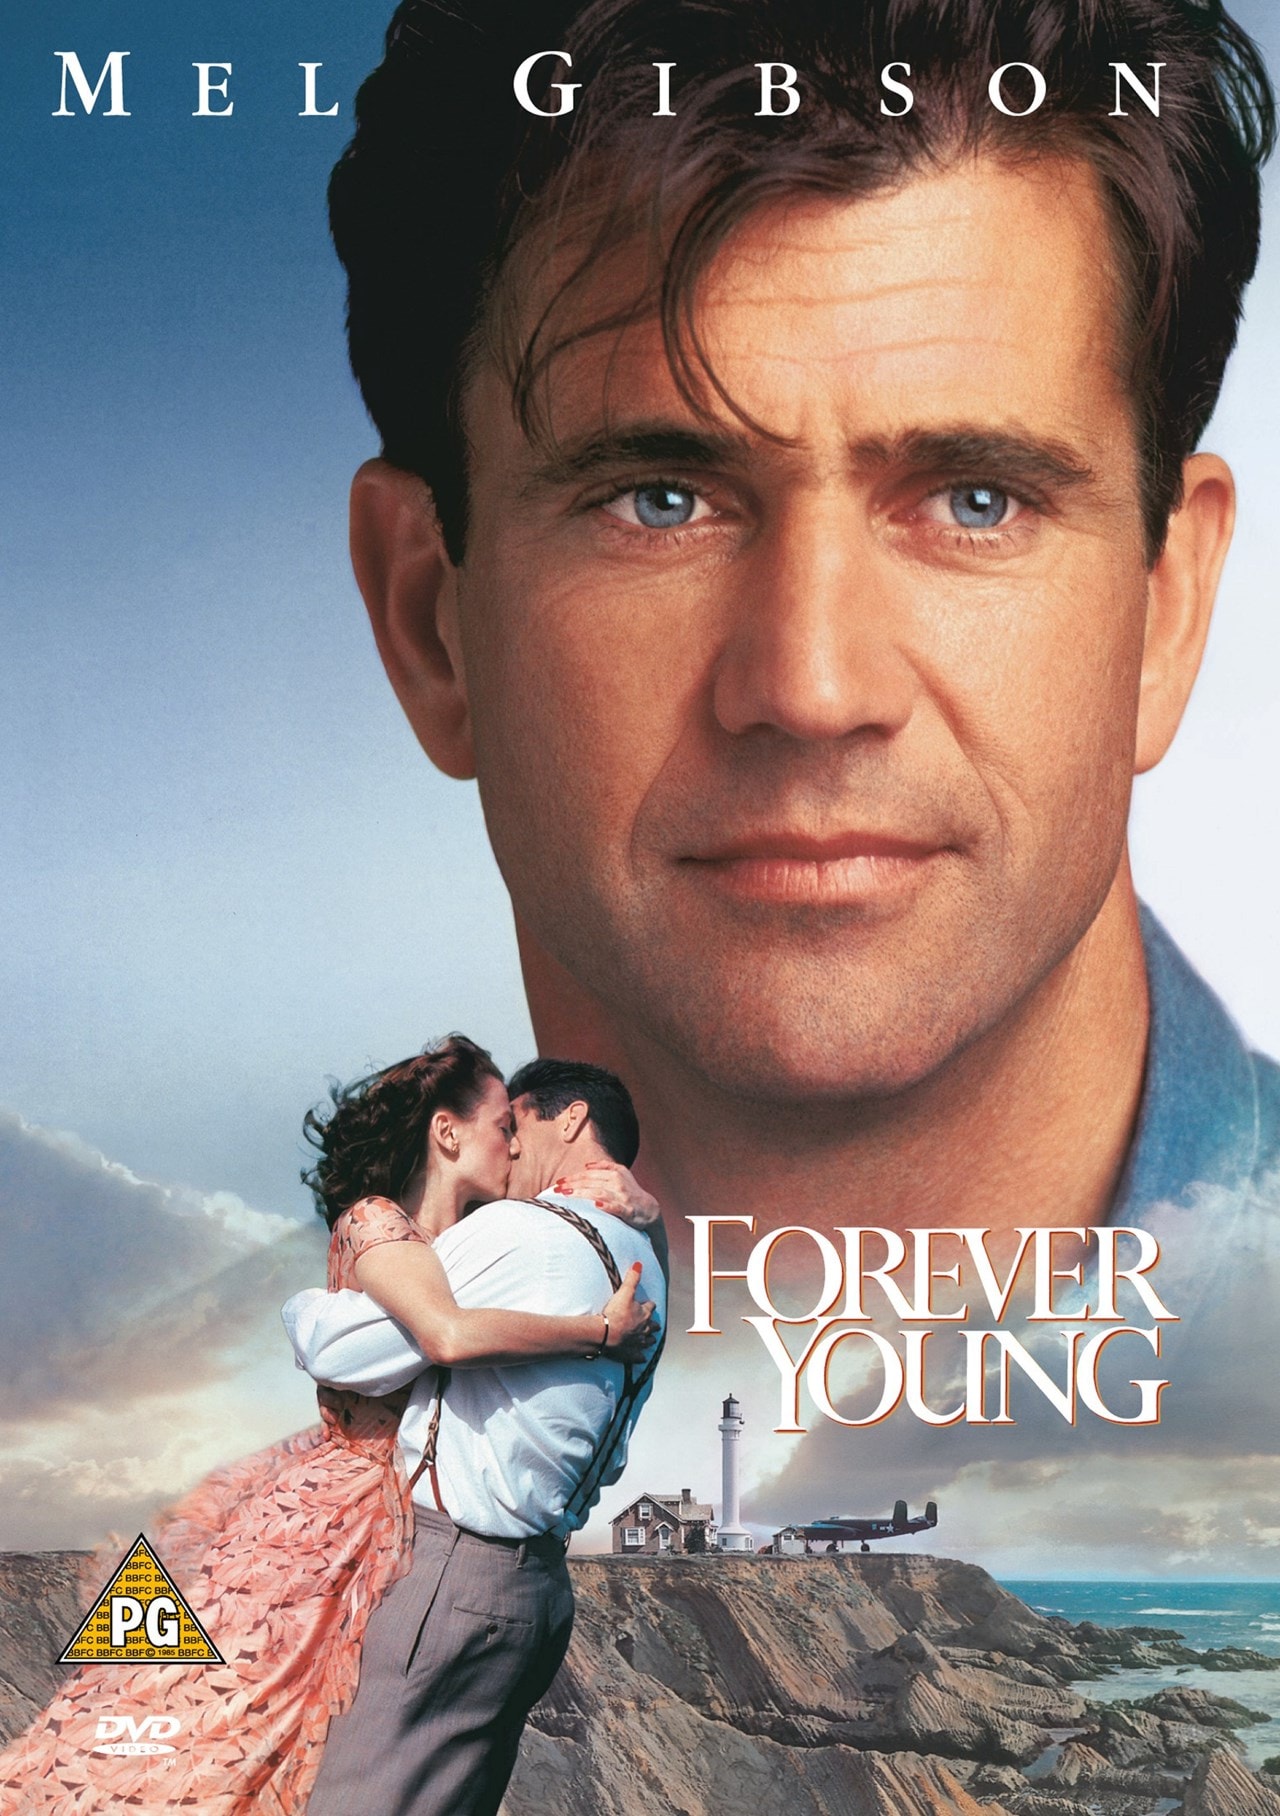 Forever Young | DVD | Free shipping over £20 | HMV Store